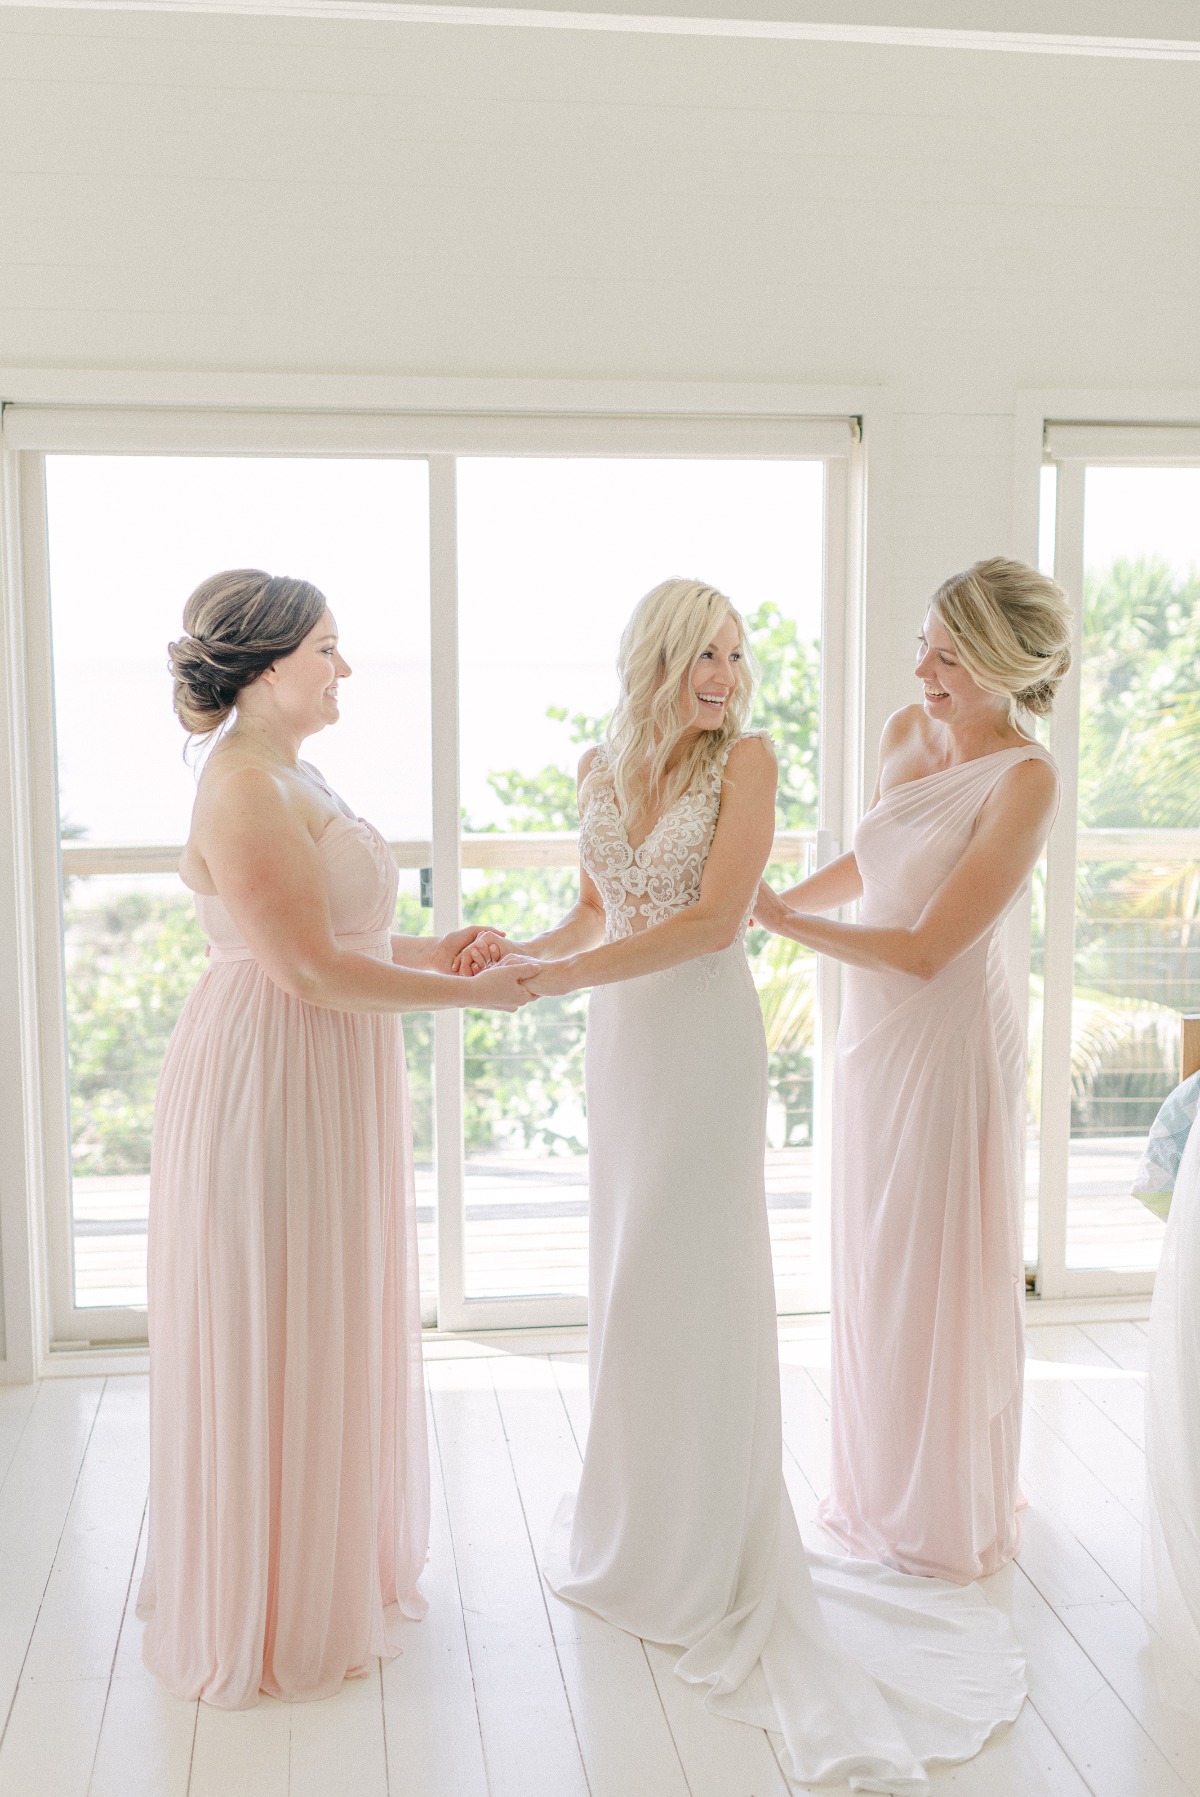 getting ready photos with bridesmaids